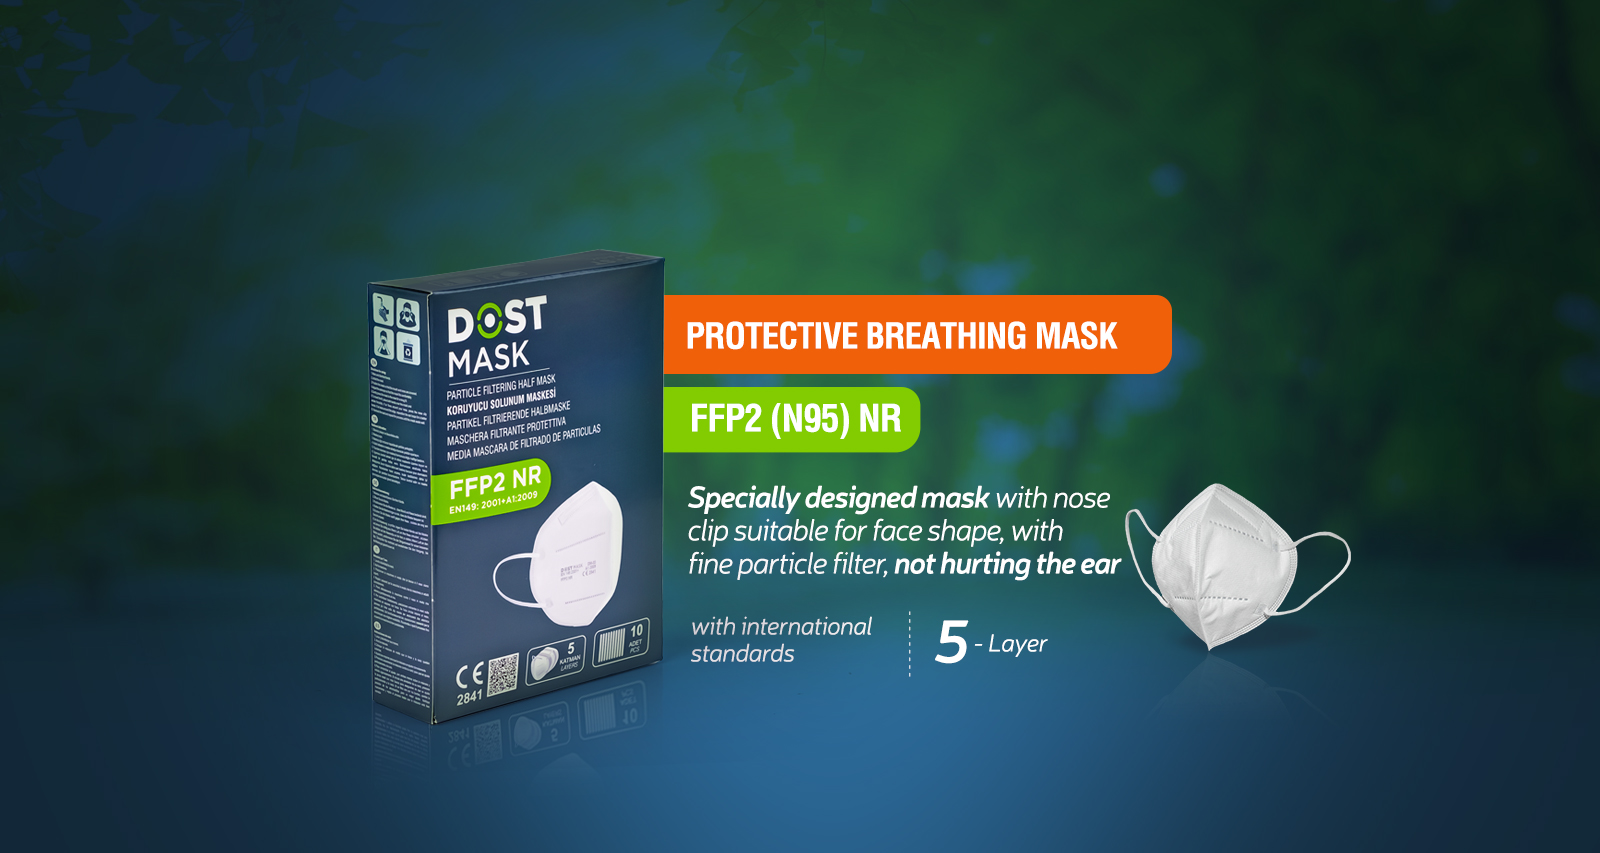 Dost Mask | High Quality Personal Protection, Meltblown Filter For Surgical Mask, A New Generation Of An Elastic Band, Elastic Meltblown Filter For Surgical Face Mask With Ear Without Hurting Special, Special Rubber Face Mask Ear Without Hurting That Let You Breathe Easy, Breathe Easy And Let The New Generation Of An Elastic Band That A Surgical Mask, Rubber Mask That Let You Breathe Easy Without Hurting Child With Special Ear Ear Without Hurting Elastic Meltblown Filter With A Special Children's Surgical Mask, Easy Breathe, Let The New Generation Of The Children Of An Elastic Band That Mask Child Filter Mask Meltblown An Elastic Band To A New Generation Of, FFP2 (N95) 5-Ply Protective Respirator Mask, Mask with Logo Printed, Mask Production, Bulk Mask Production, Konya Mask Production, Konya Mask, Konya Mask Wholesaler